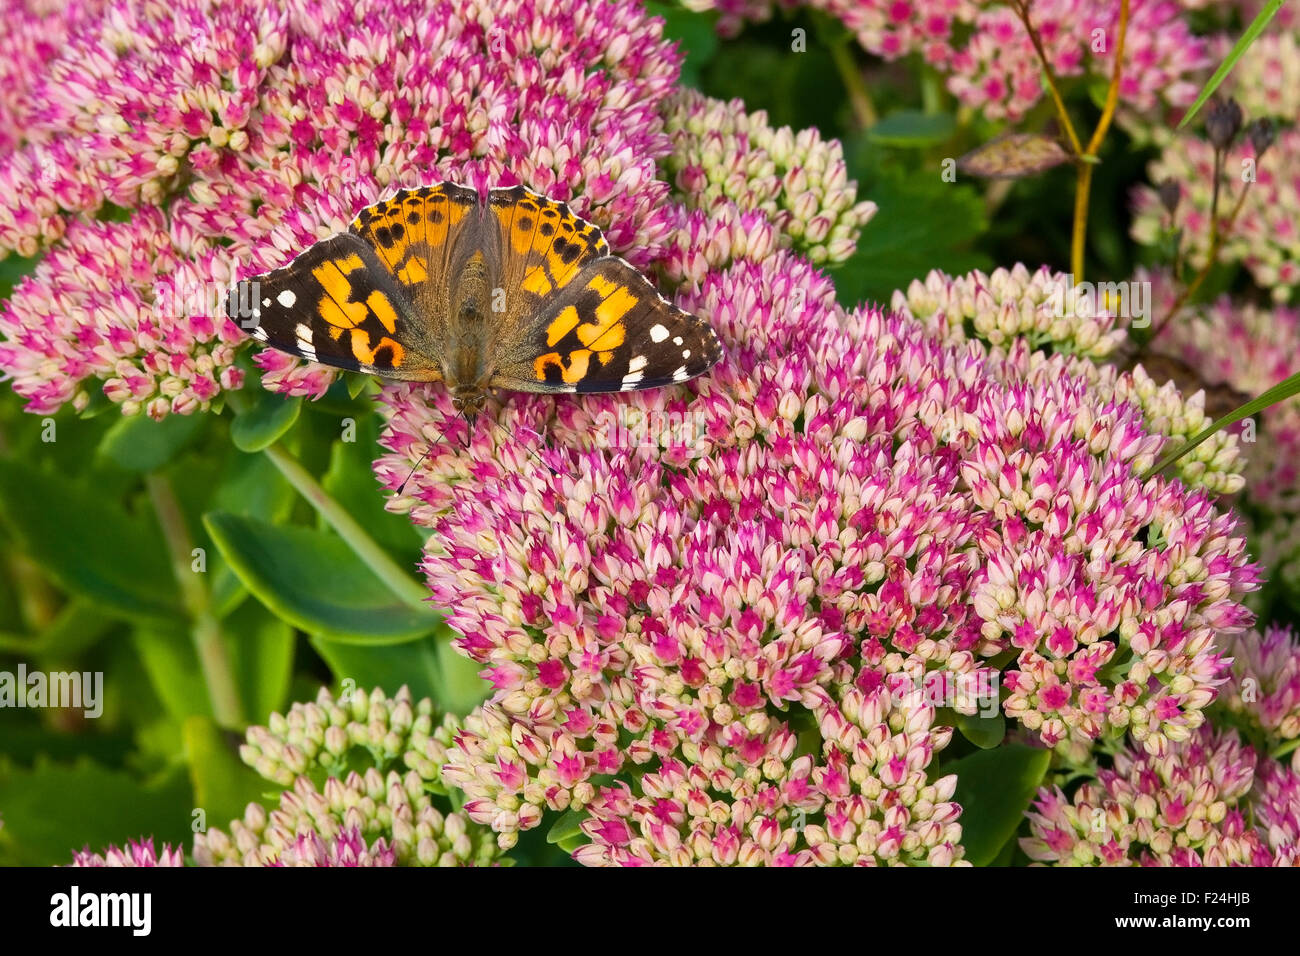 A painted lady butterfly with the Latin name of Cynthia cardui feeding from the bright pink flowers of Sedum spectabile Stock Photo